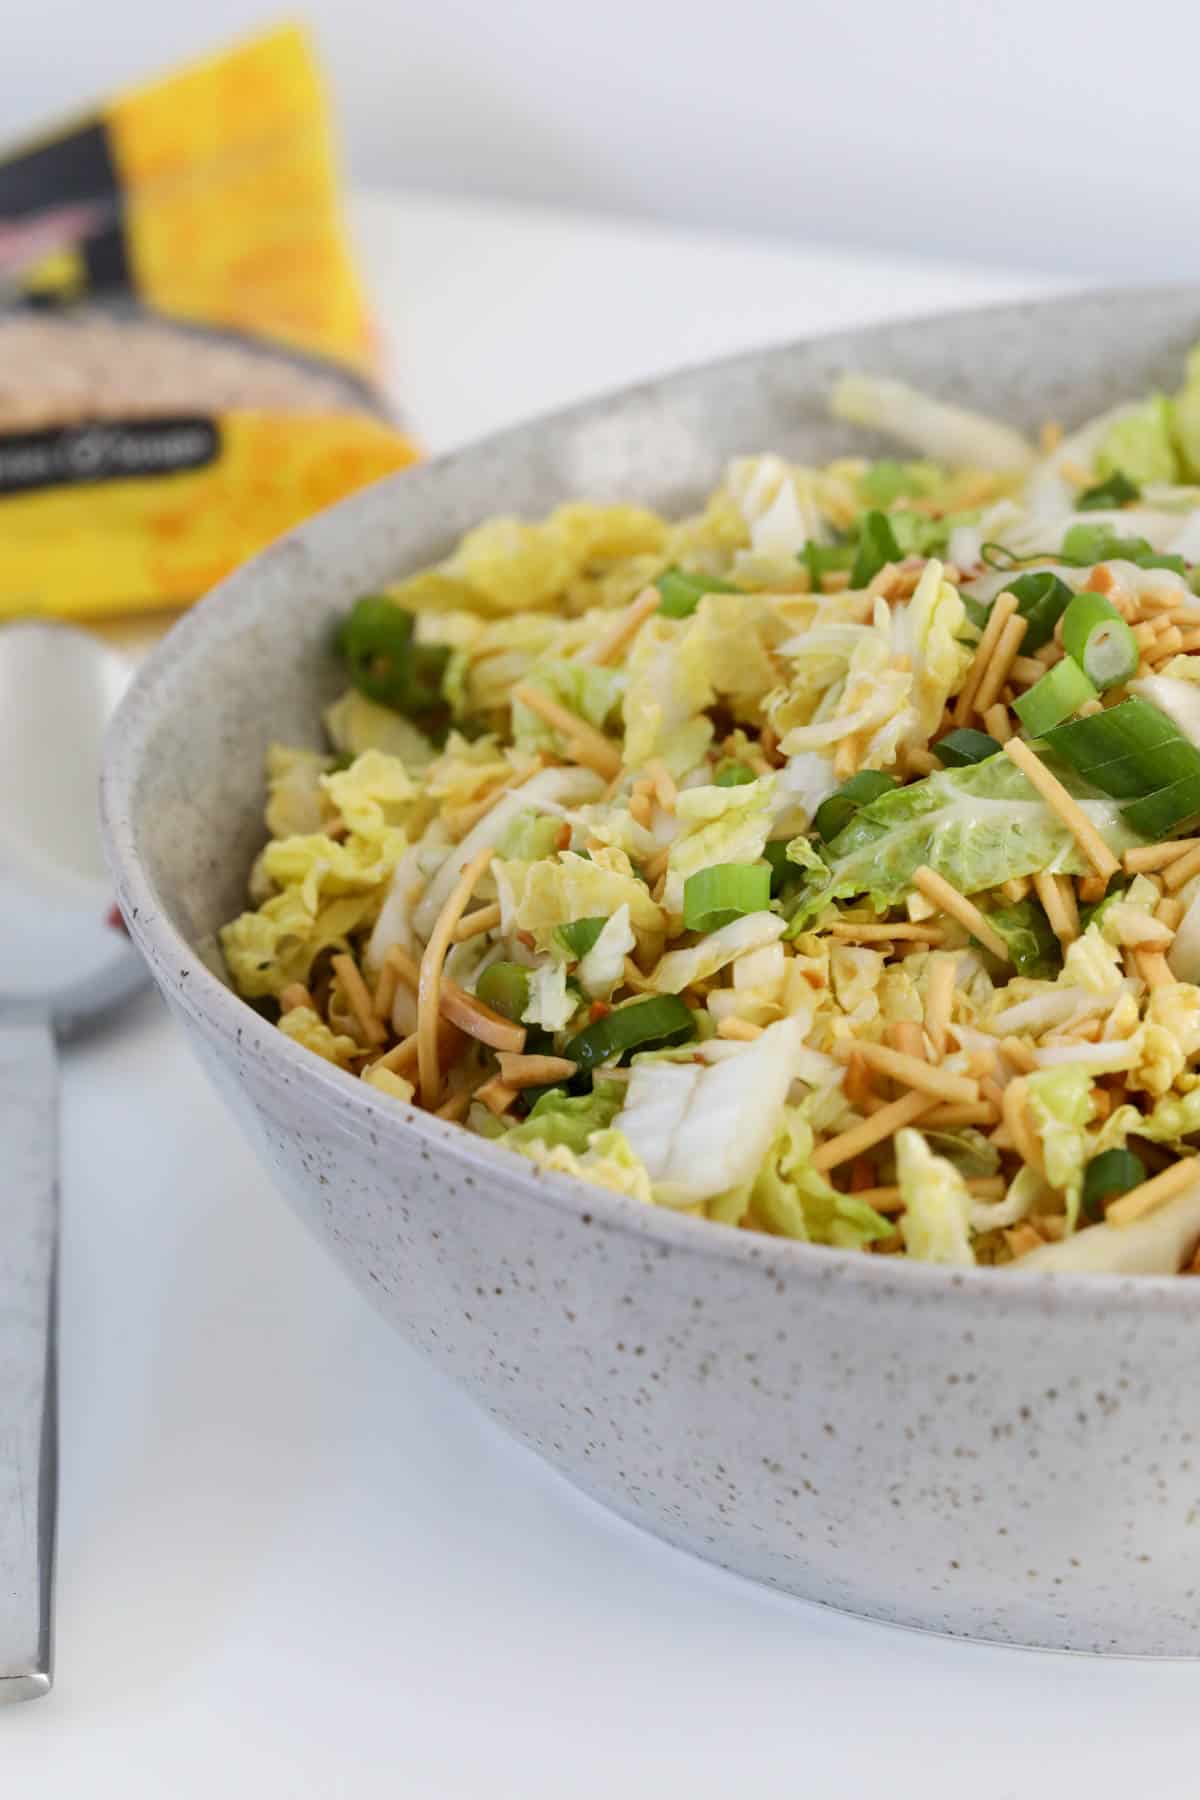 A bowl of salad with a packet of Chang's fried noodles placed on a table.